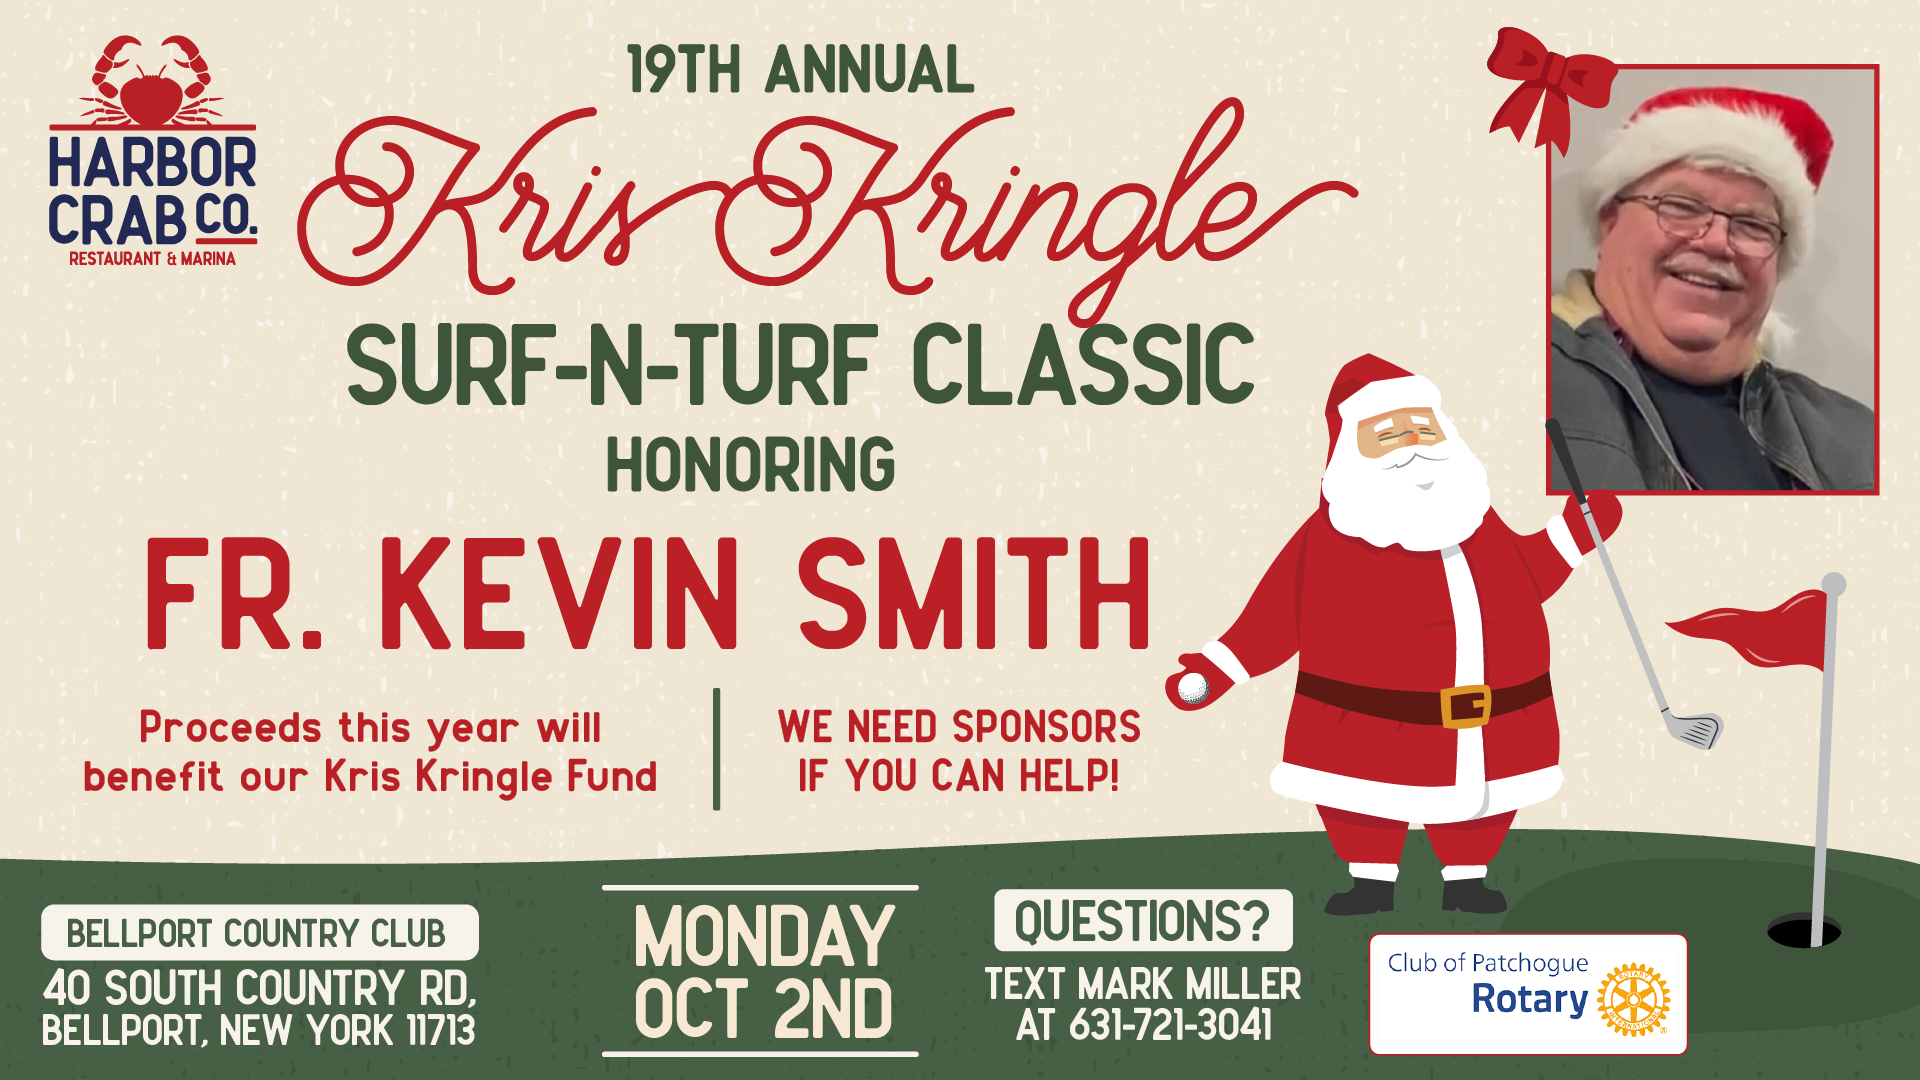 19th Annual Kris Kringle Fundraiser on Monday, October 2nd, 2023.